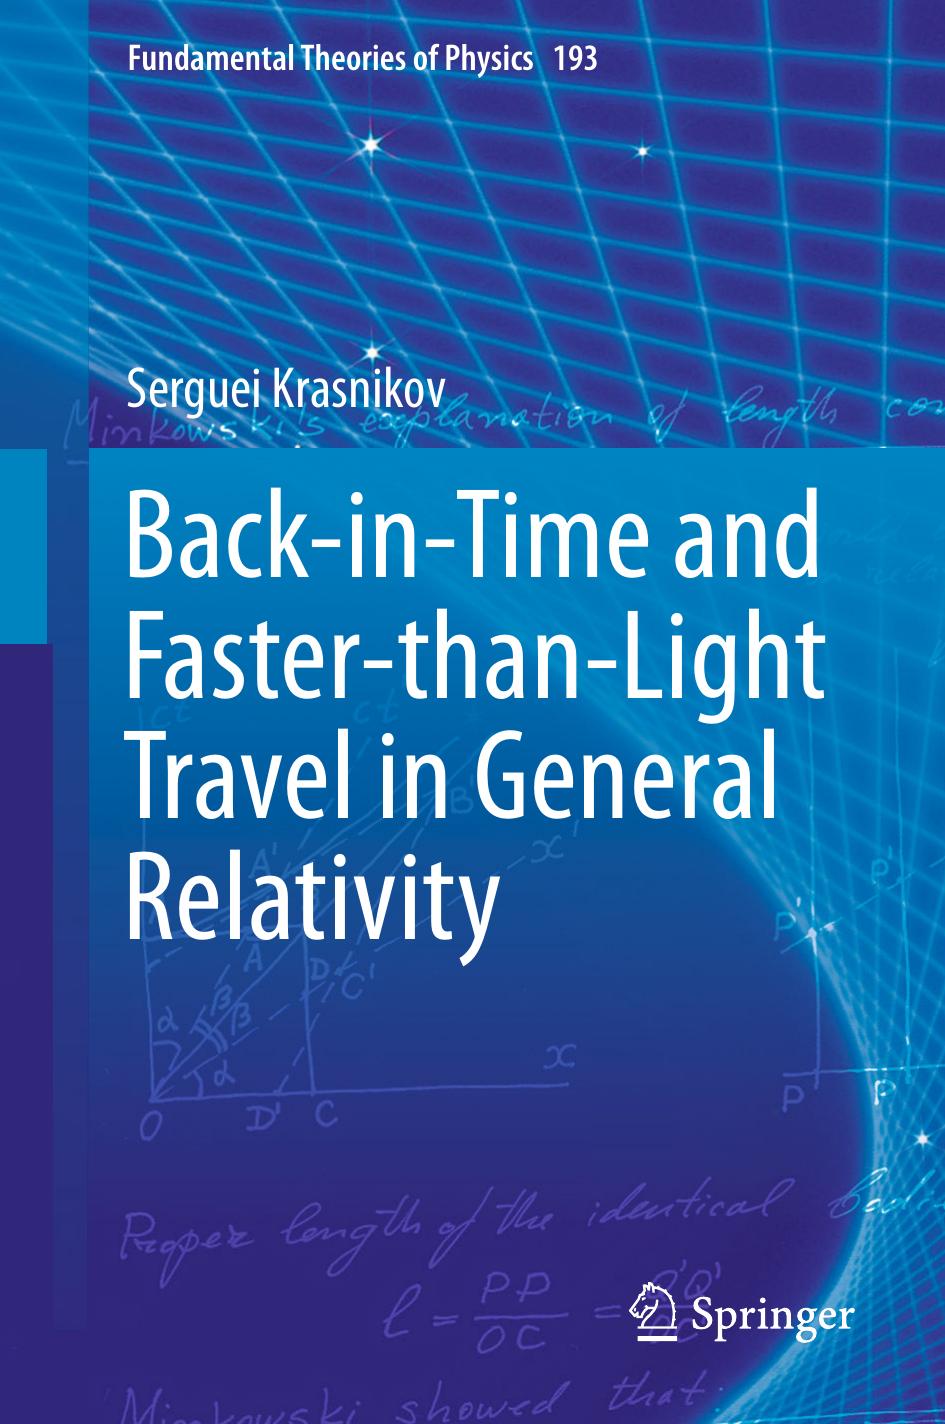 Back-in-Time and Faster-than-Light Travel in General Relativity by Serguei Krasnikov